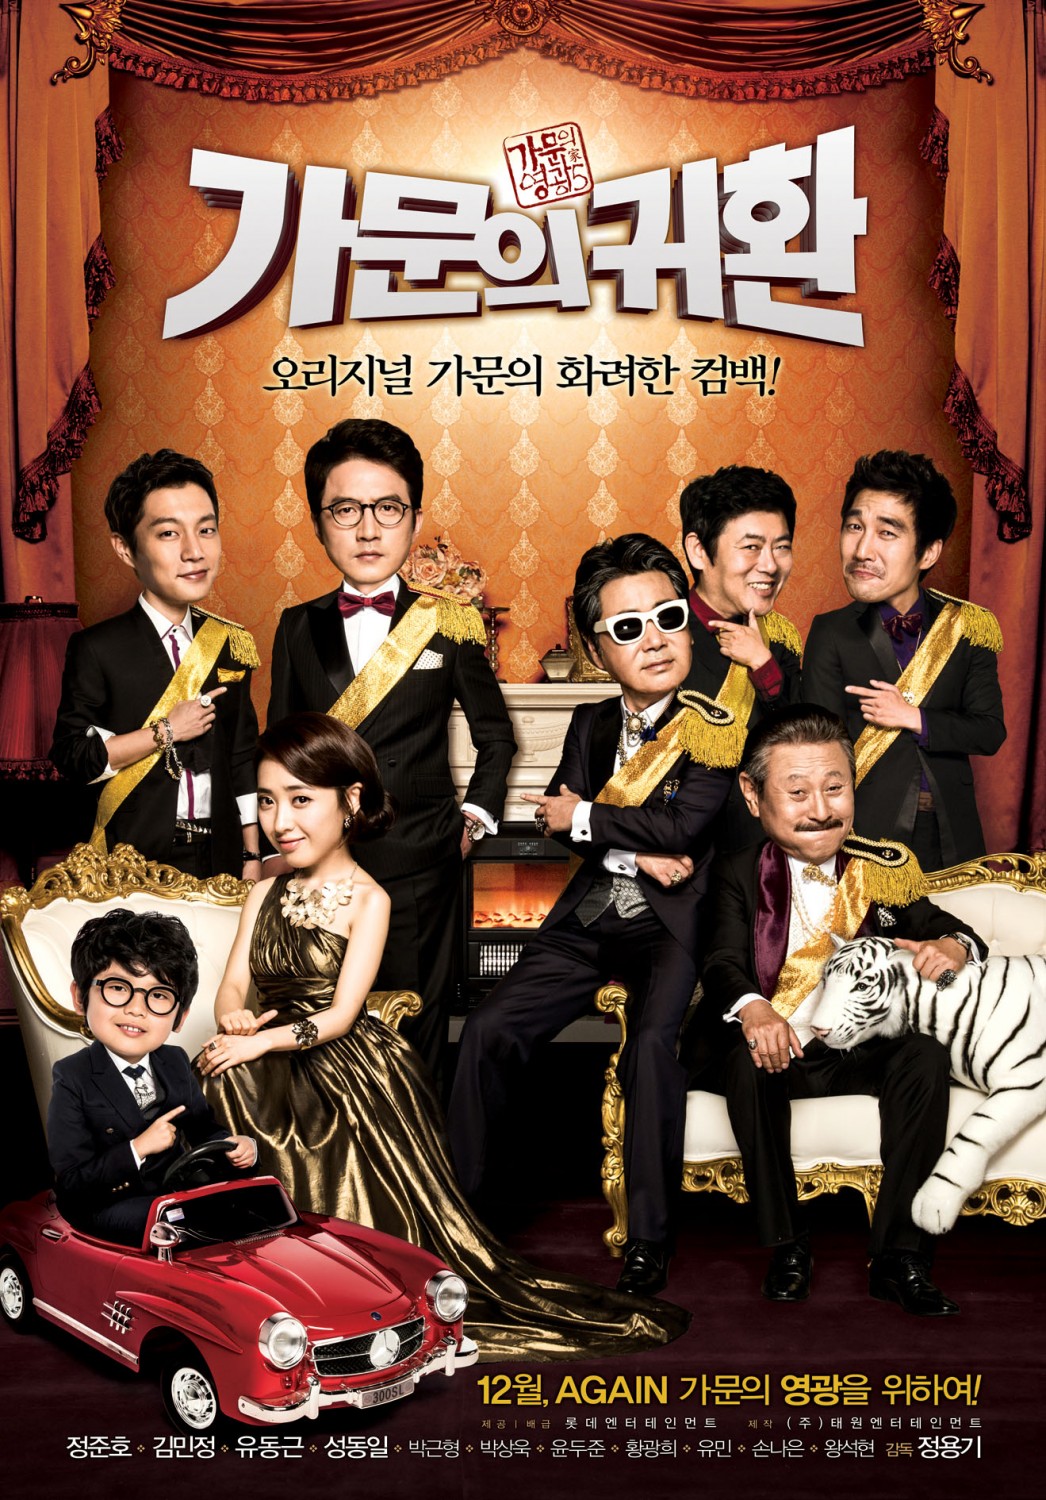 Extra Large Movie Poster Image for Marrying the Mafia 5: Return of the Family (#5 of 7)